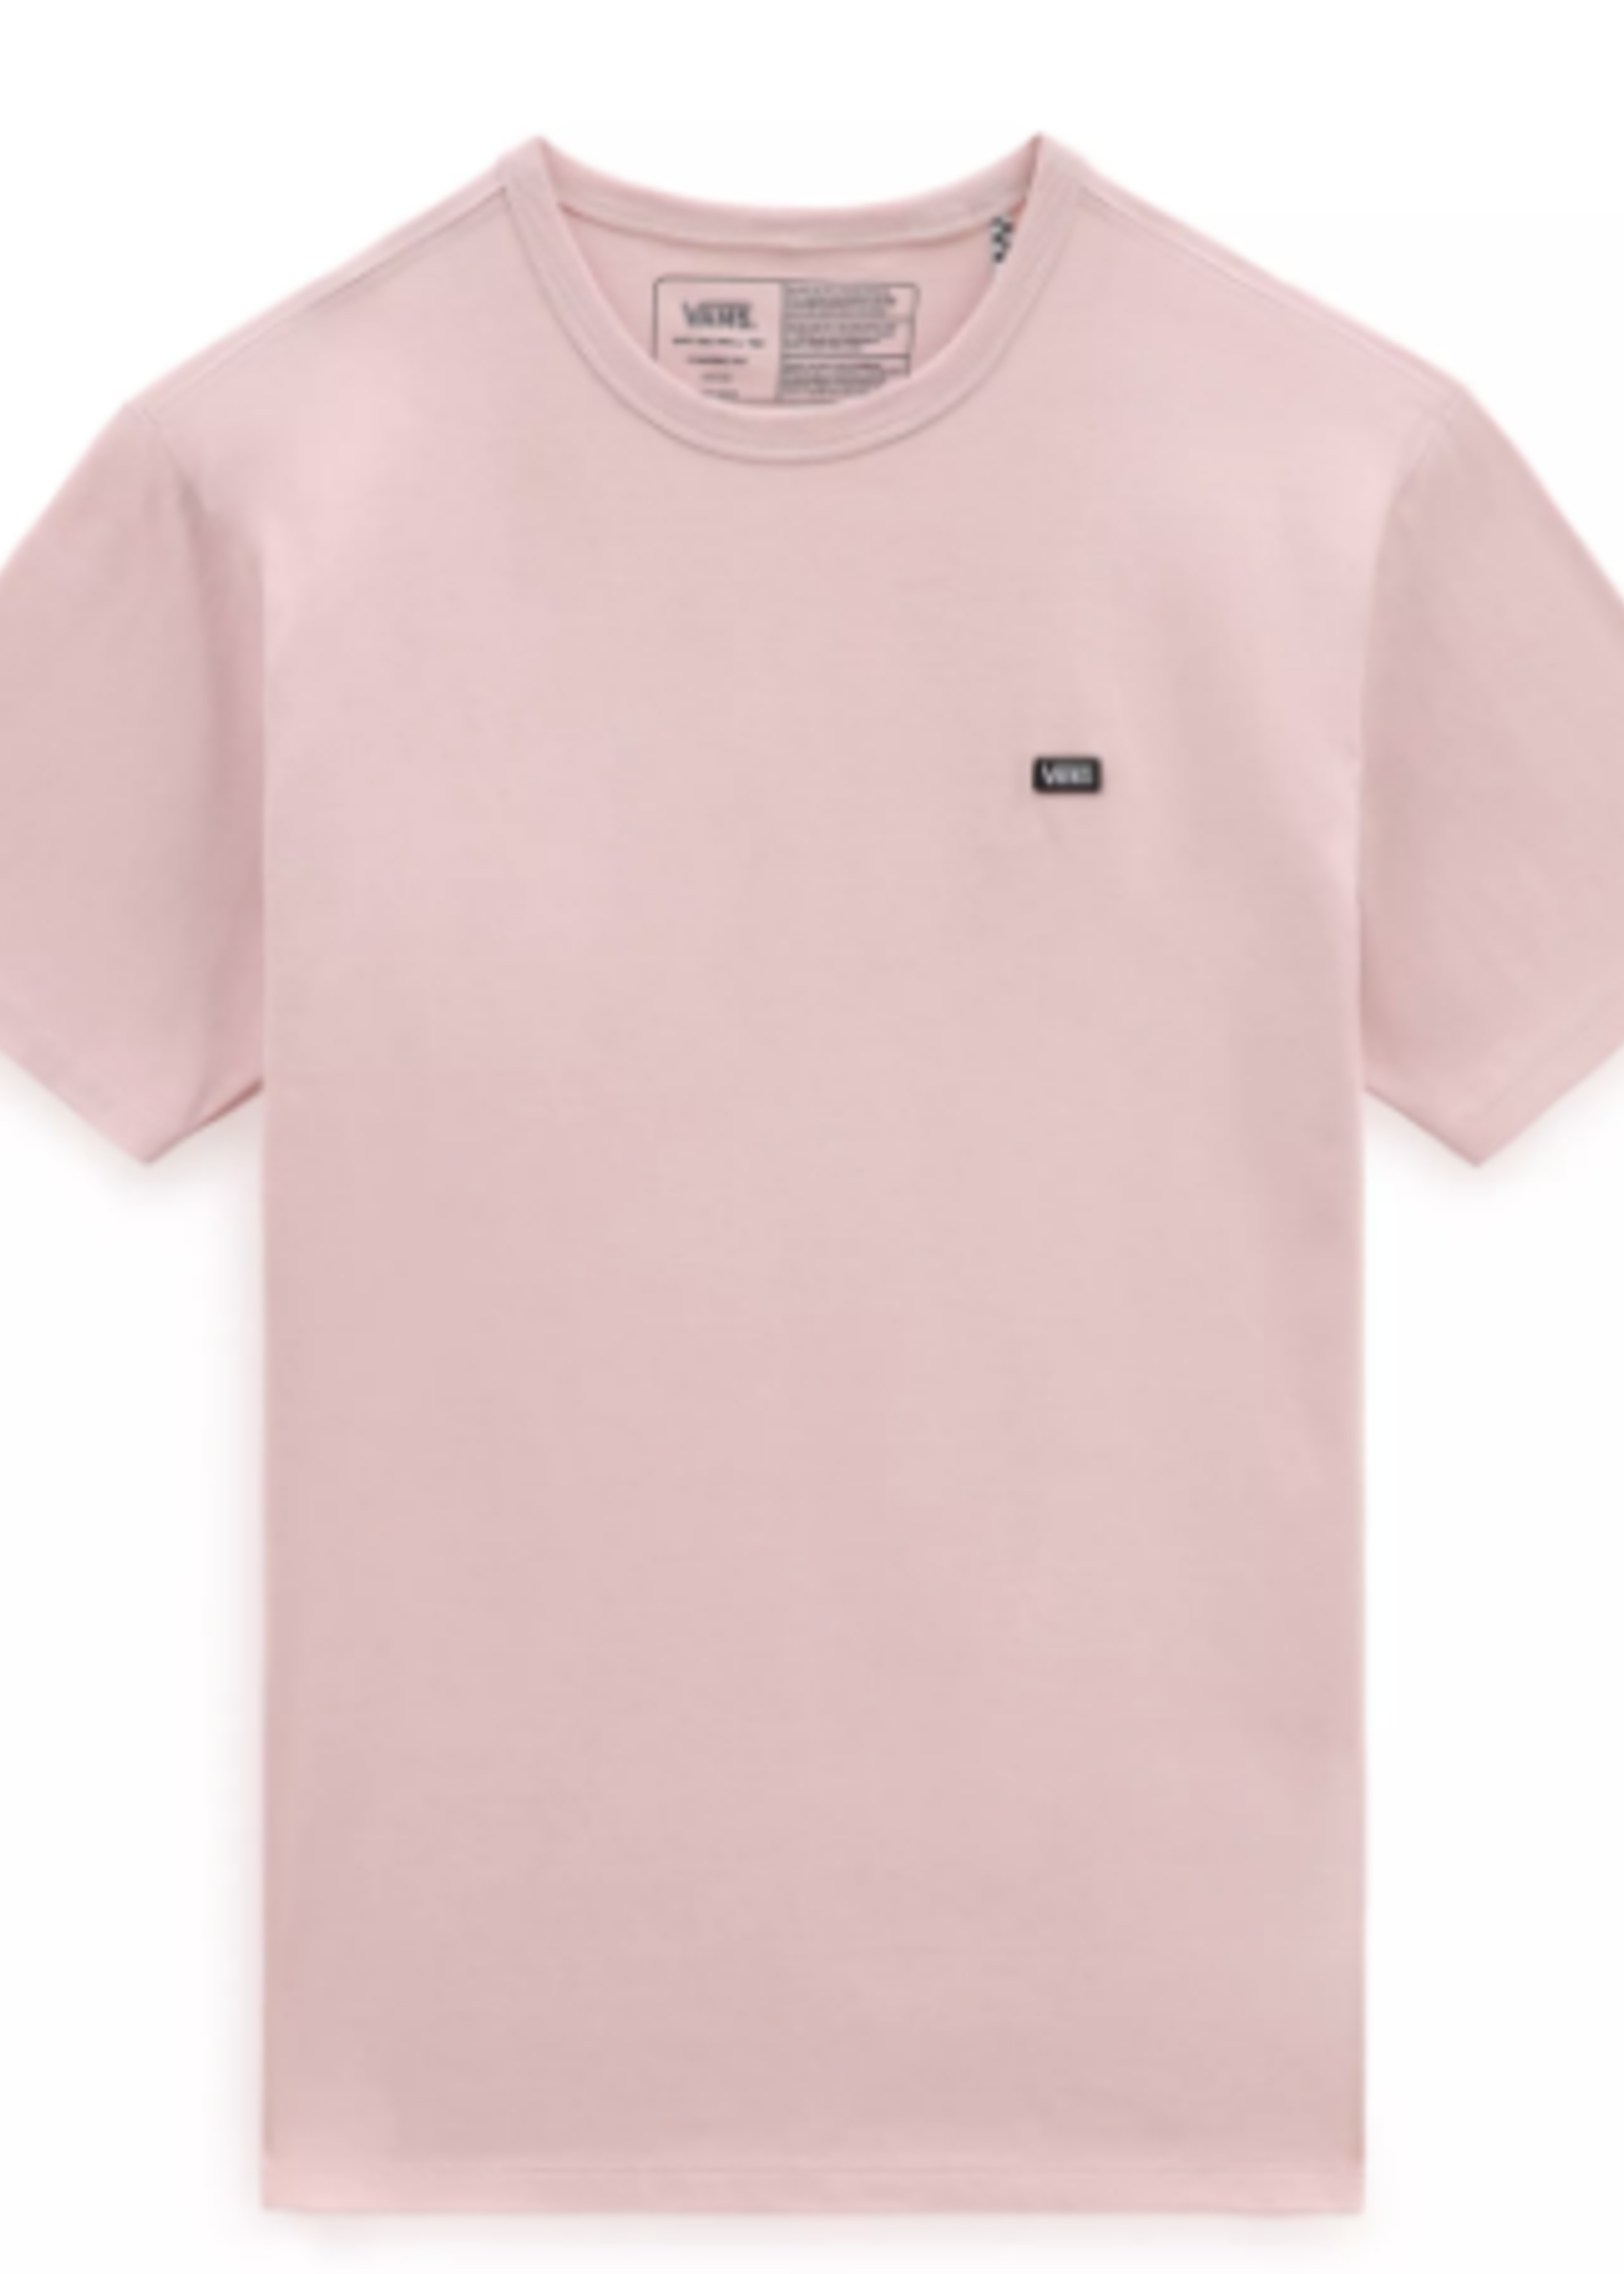 Vans Off The Wall Classic Tee Rose Smok